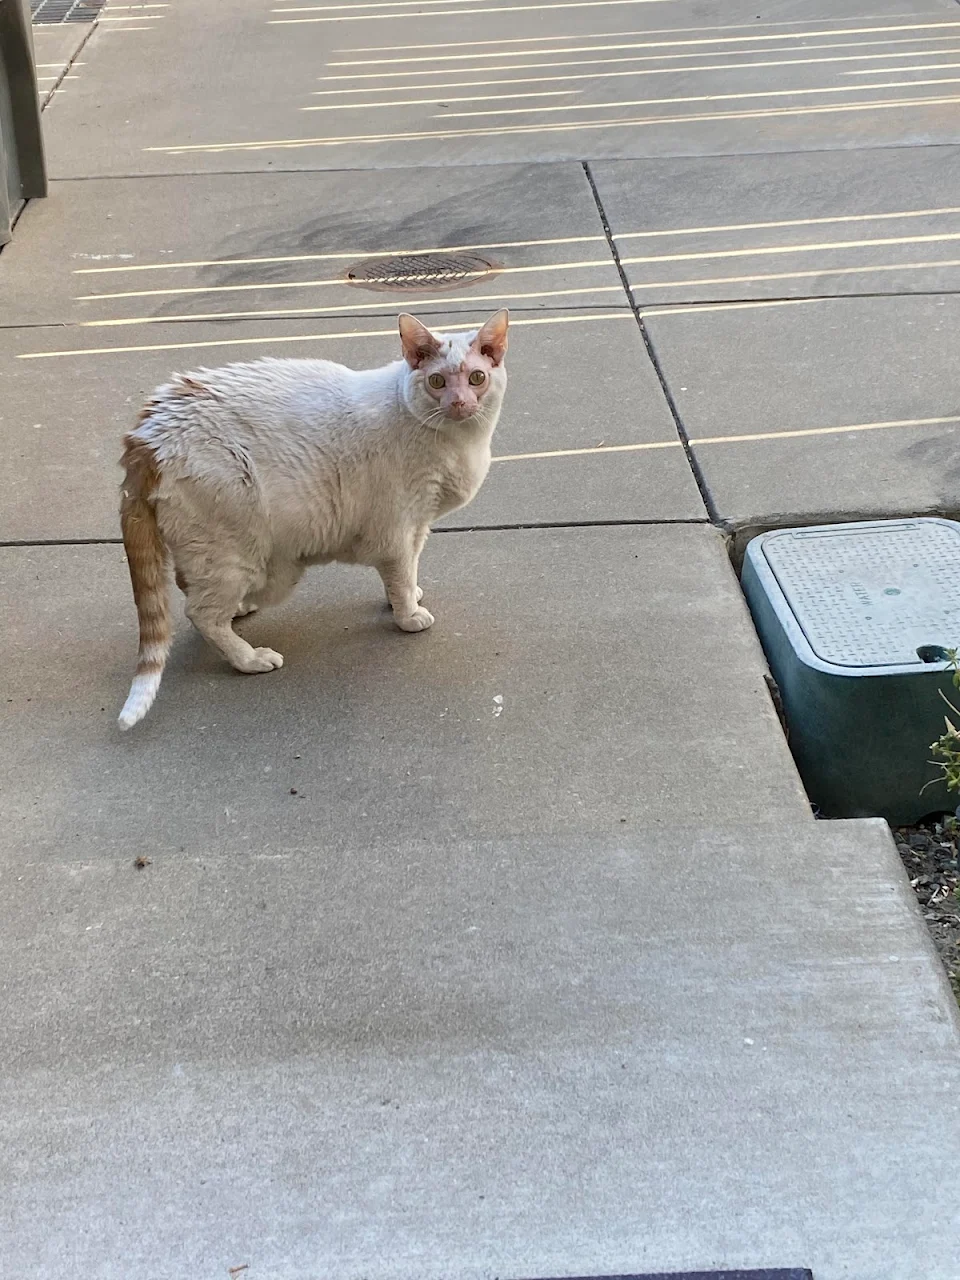 What’s up with this cat’s bald face? It’s a stray that has appeared near my house.